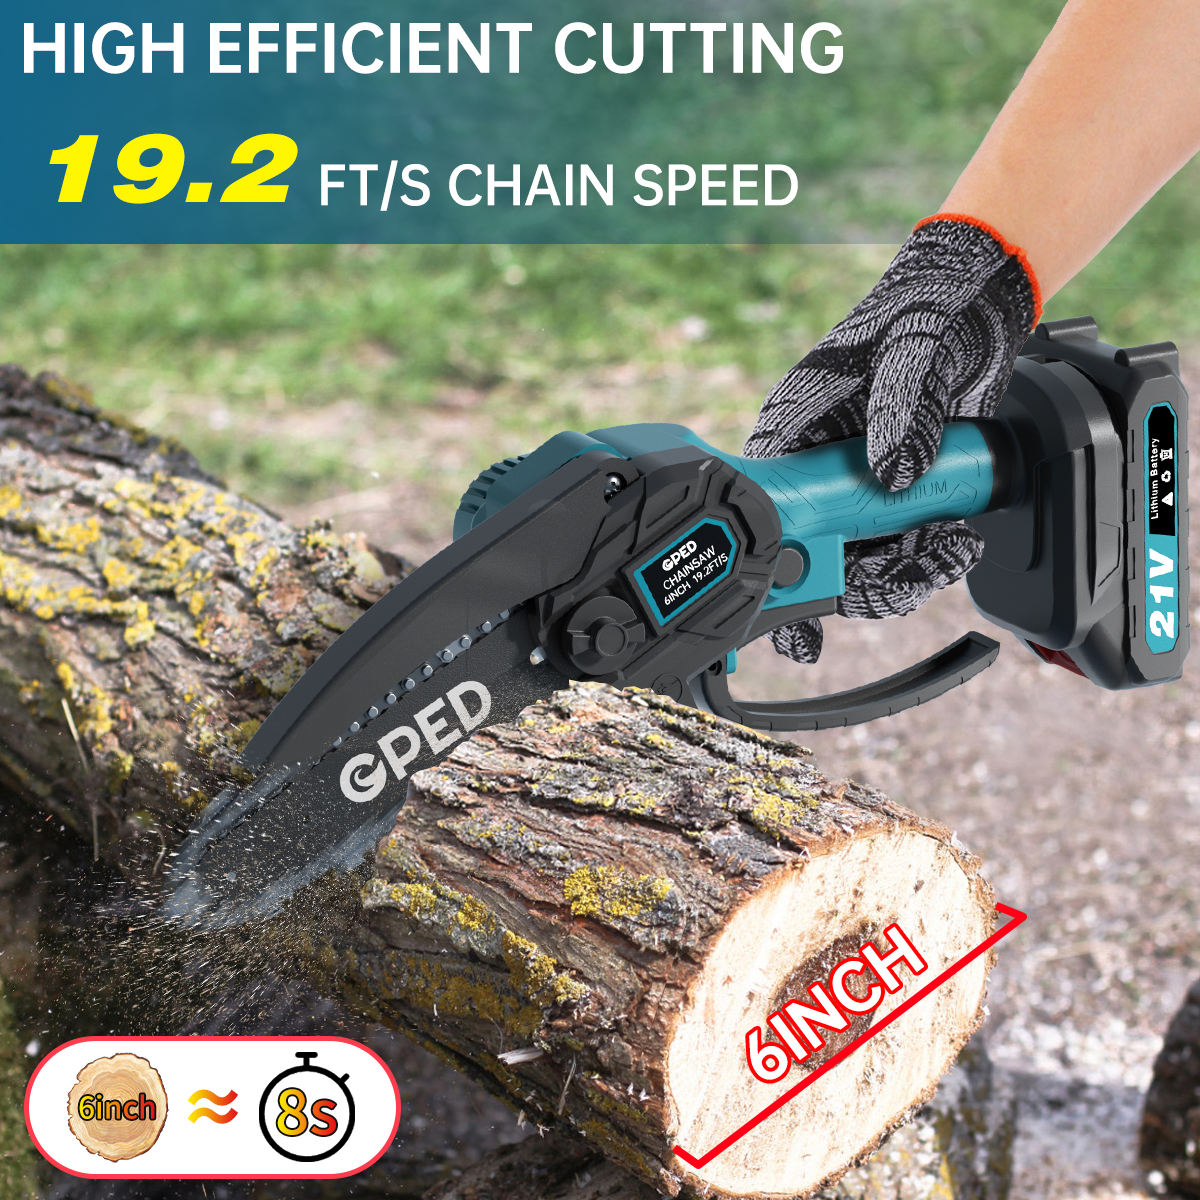 Mini Chainsaw, 6 inch Portable Electric Chainsaw Cordless, Handheld Chain Saw Pruning Shears Chainsaw for Tree Branches, Courtyard, Household and Garden(2 Mini Chainsaw + 2 Batteries + 2 Guide Bar) - image 4 of 7